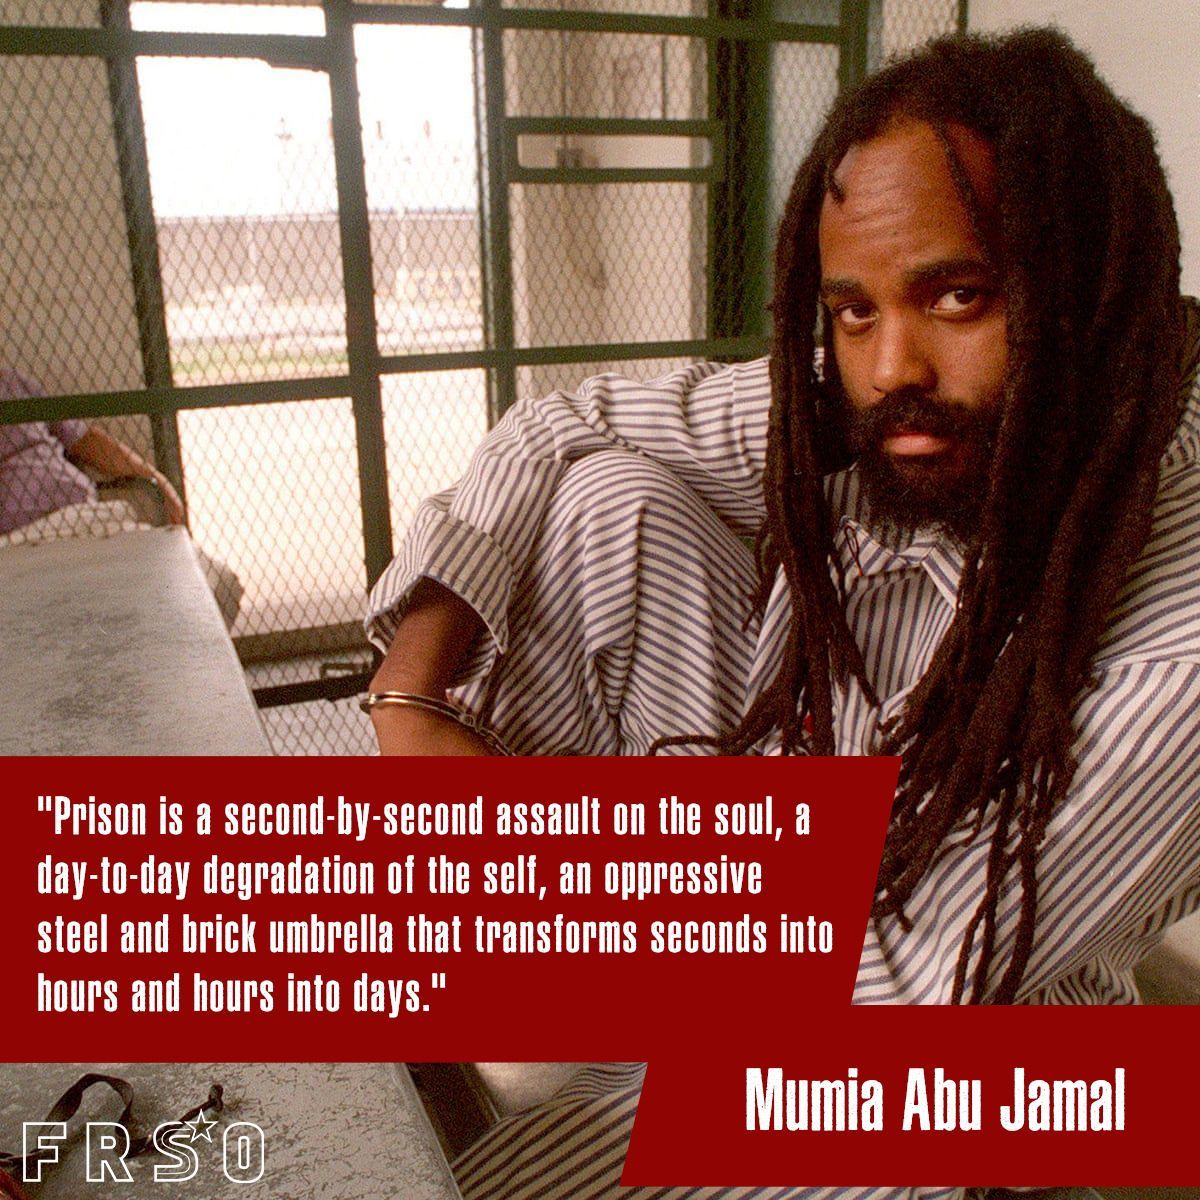 #OnThisDay 04/24/1954: Mumia Abu Jamal was born. He is a former #BlackPantherParty member & revolutionary journalist who has been a #PoliticalPrisoner since 1981. He was on death row until 2012, when a decades-long campaign succeeded in stopping his execution. #FreeThemAll